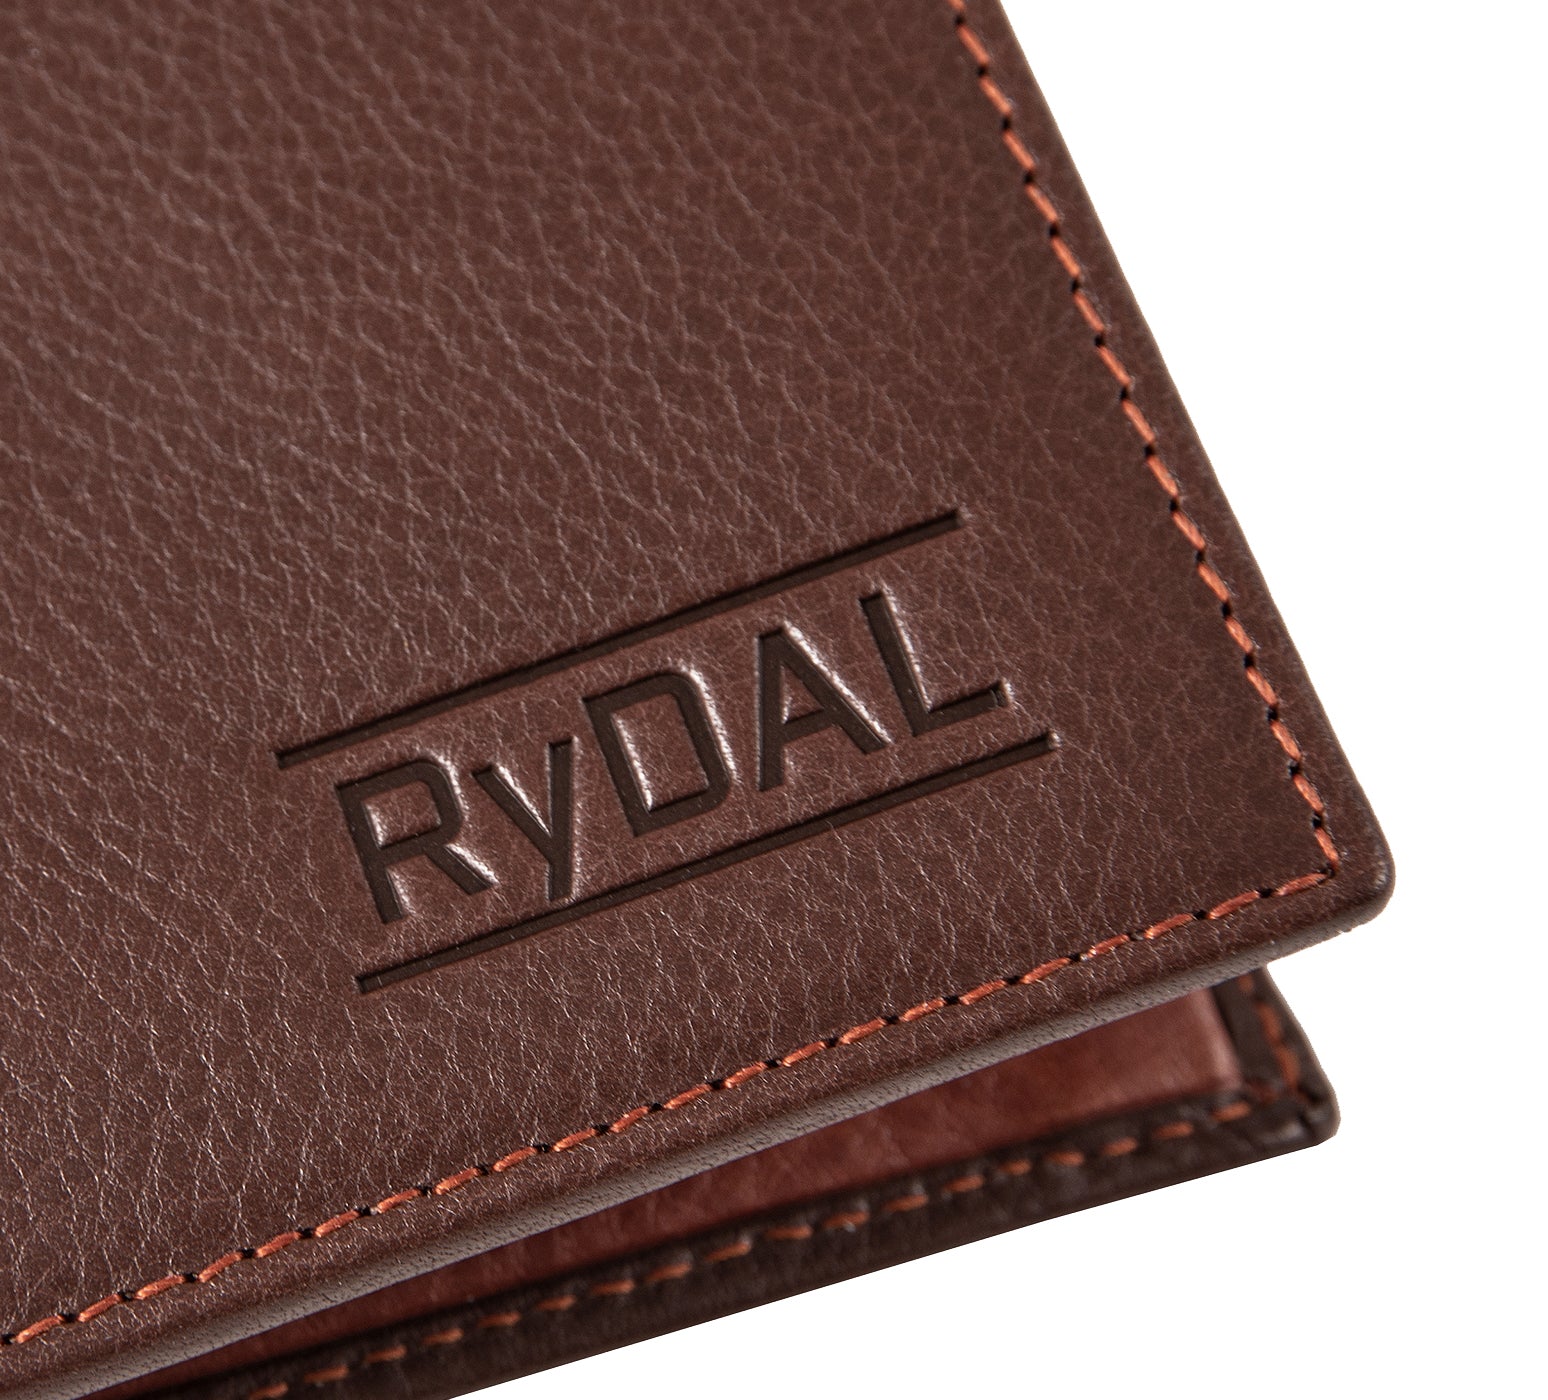 Mens Leather Wallet with Coin Pocket from Rydal in 'Dark Brown/Rust' showing close up of logo.